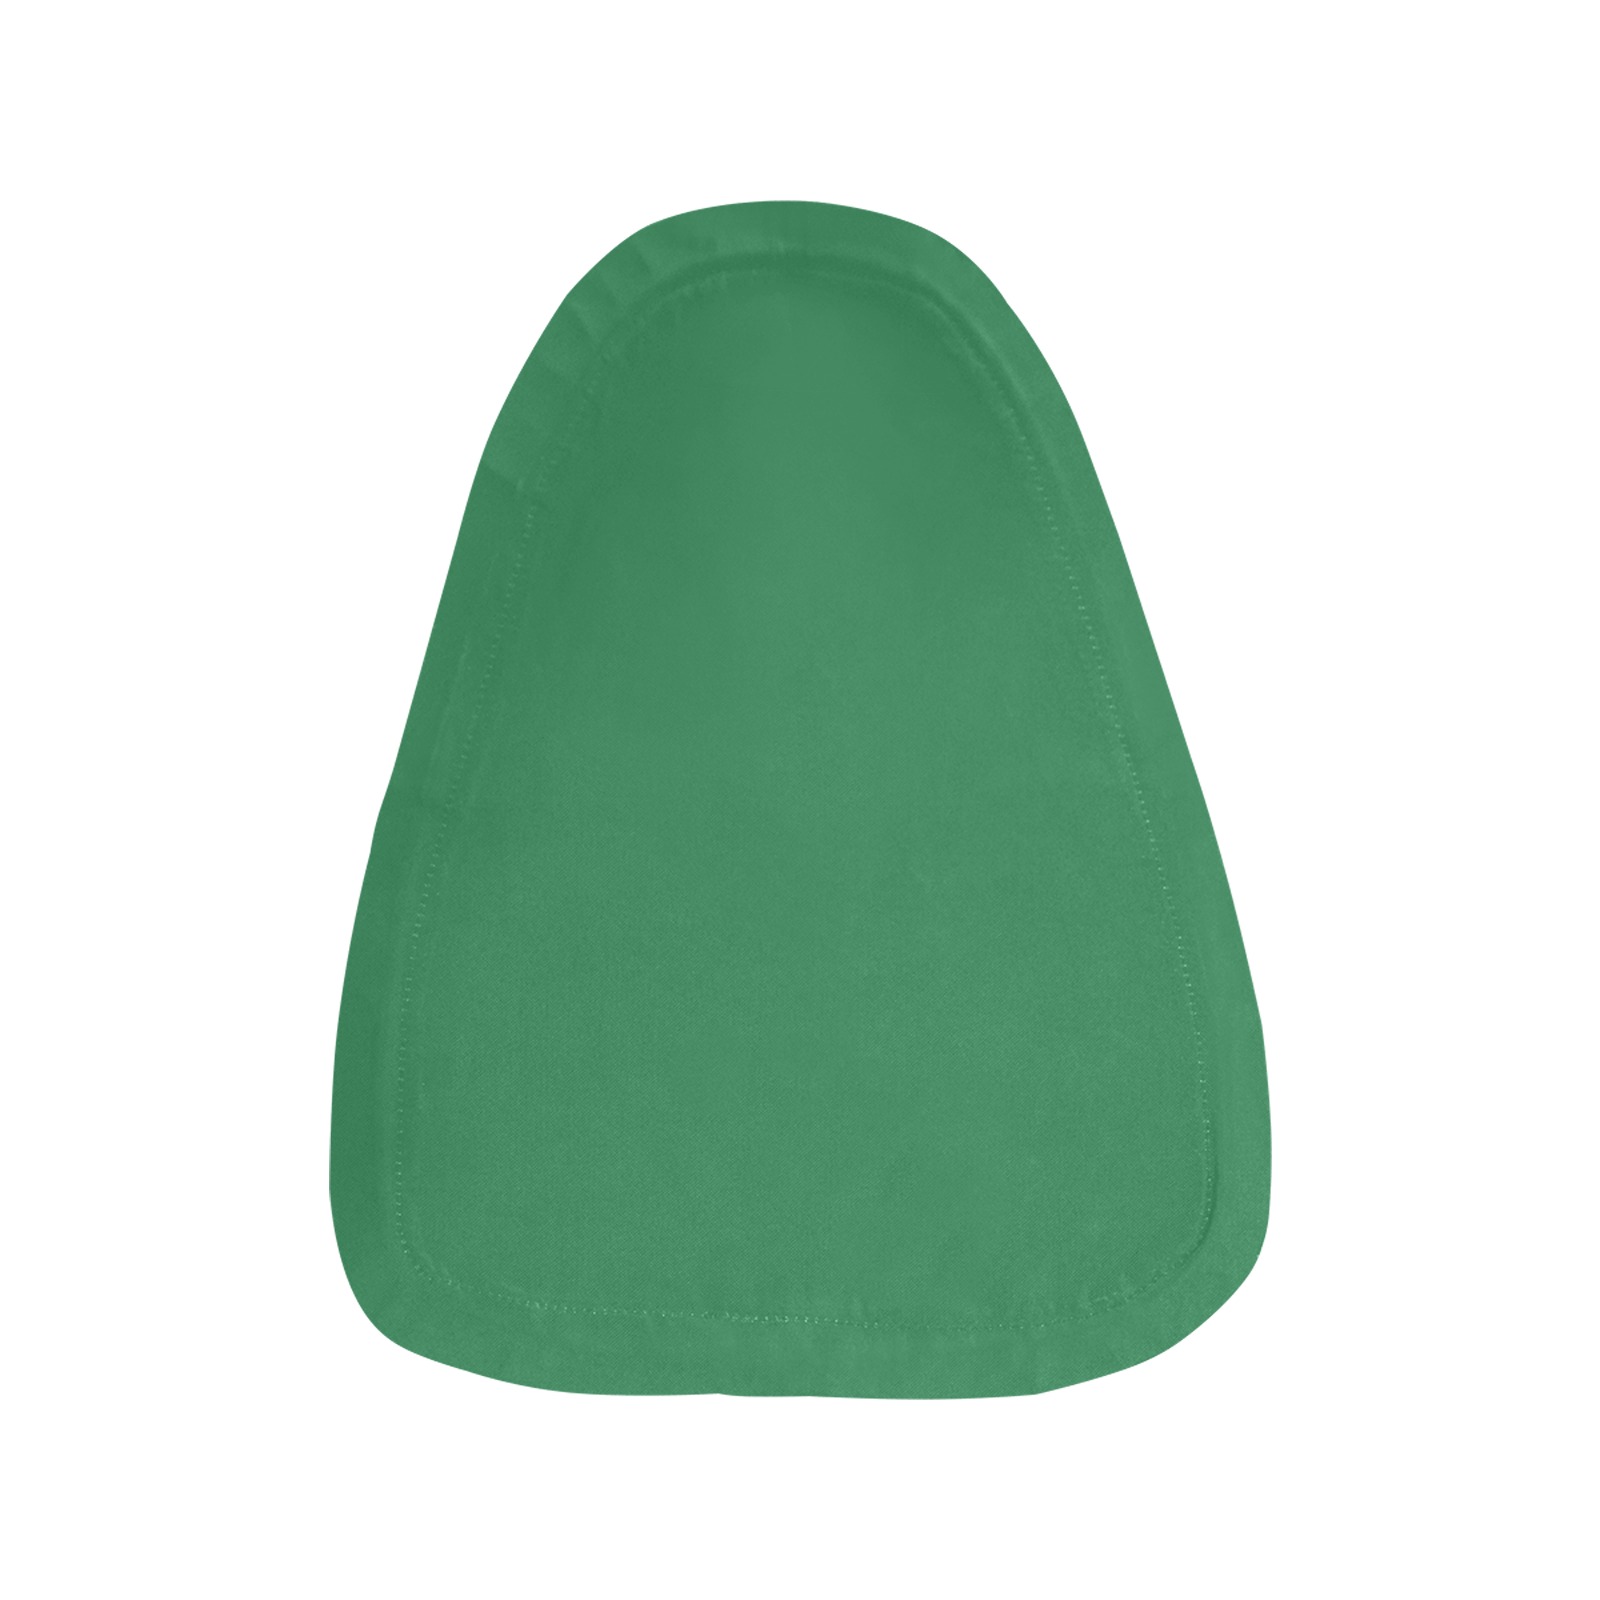 color sea green Waterproof Bicycle Seat Cover